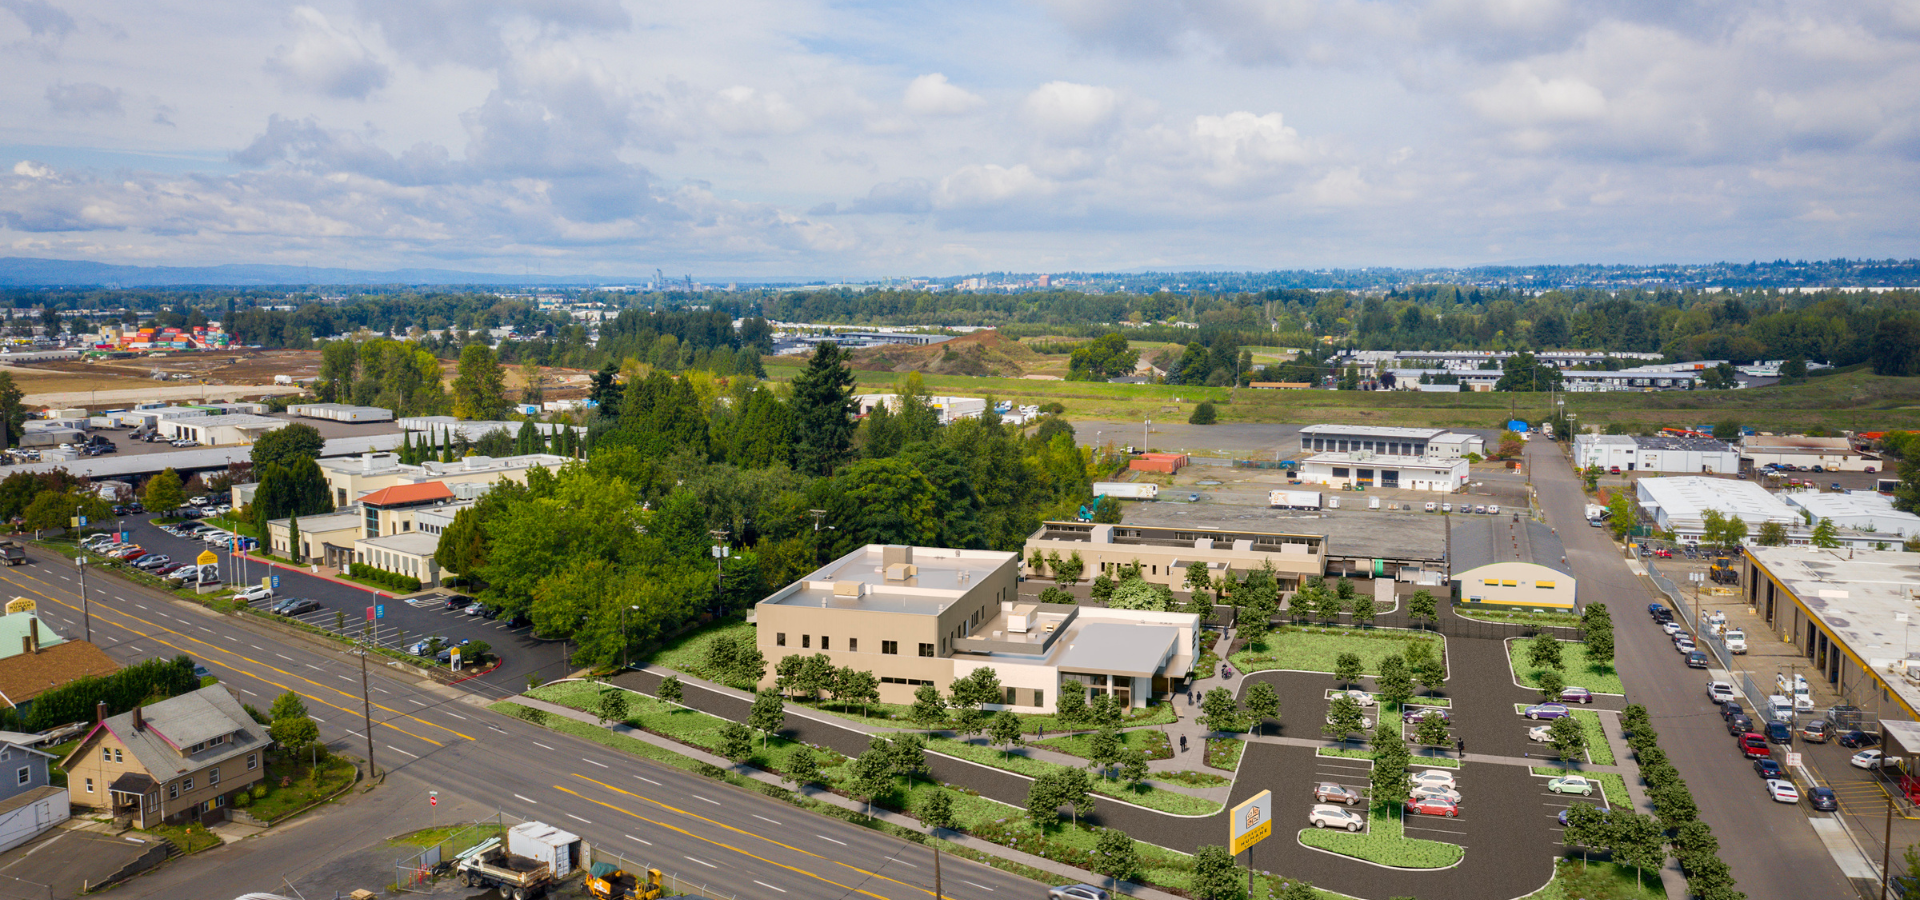 OHS Portland Campus and Community Veterinary Hospital Aerial Shot